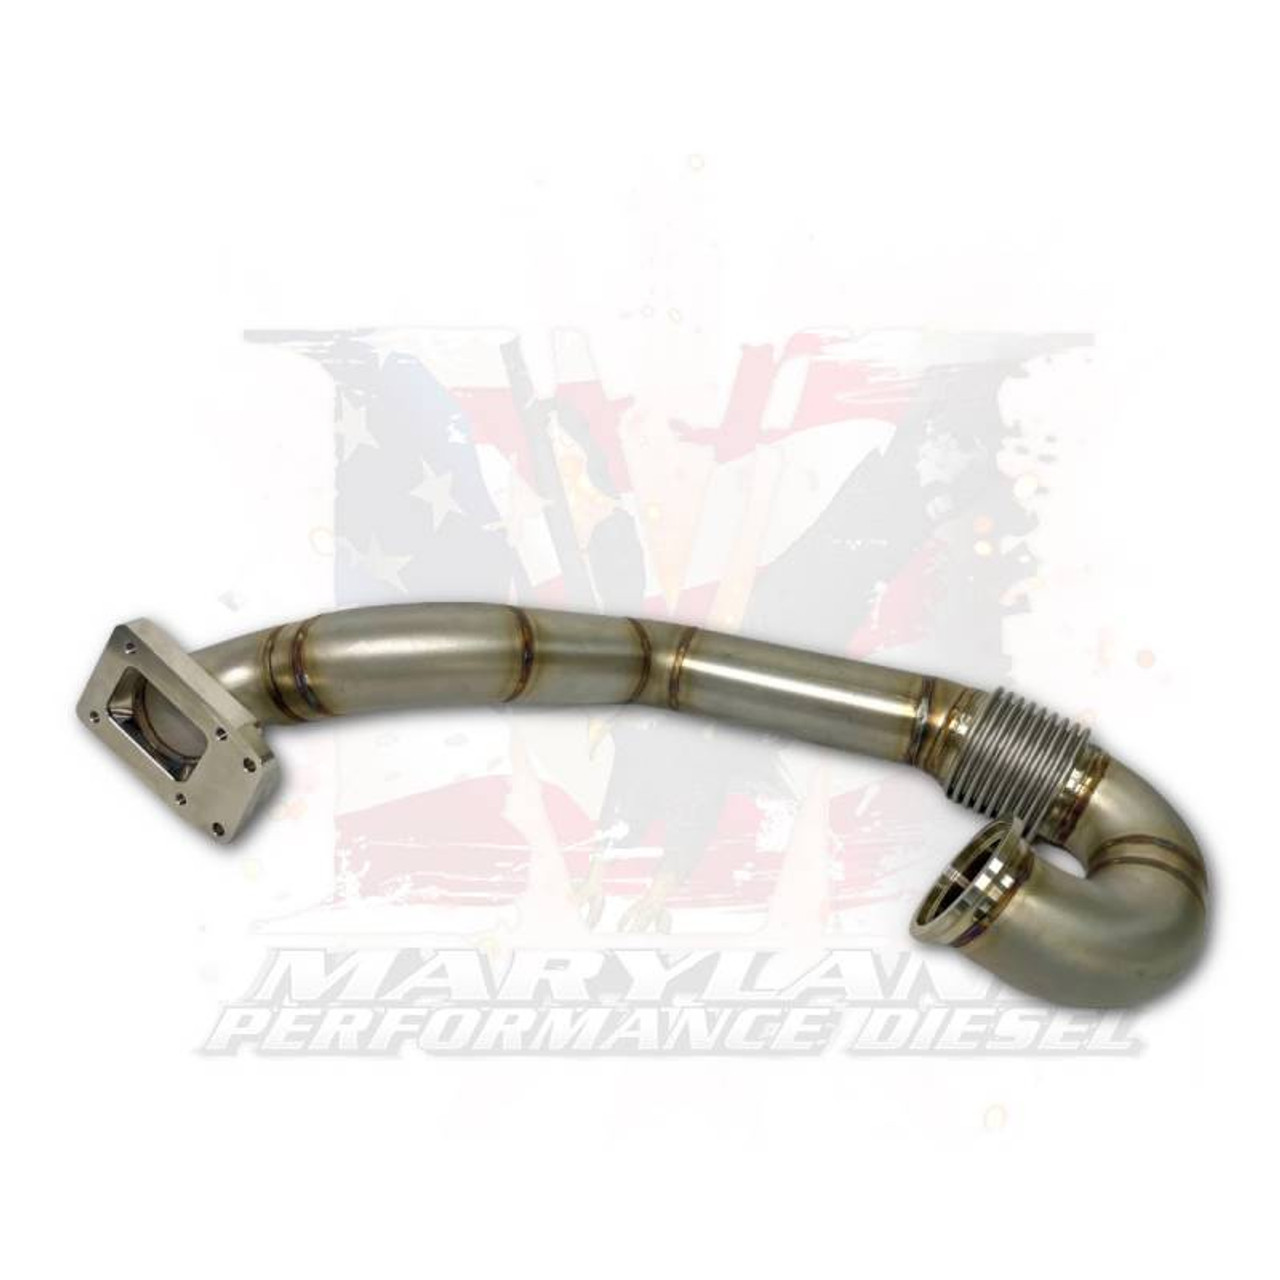 MPD Compound Kit for 2017 to 2019 Ford 6.7L Powerstroke (MPD-67-PSD-1719-CTK)  Hotside Exhaust Pipe View